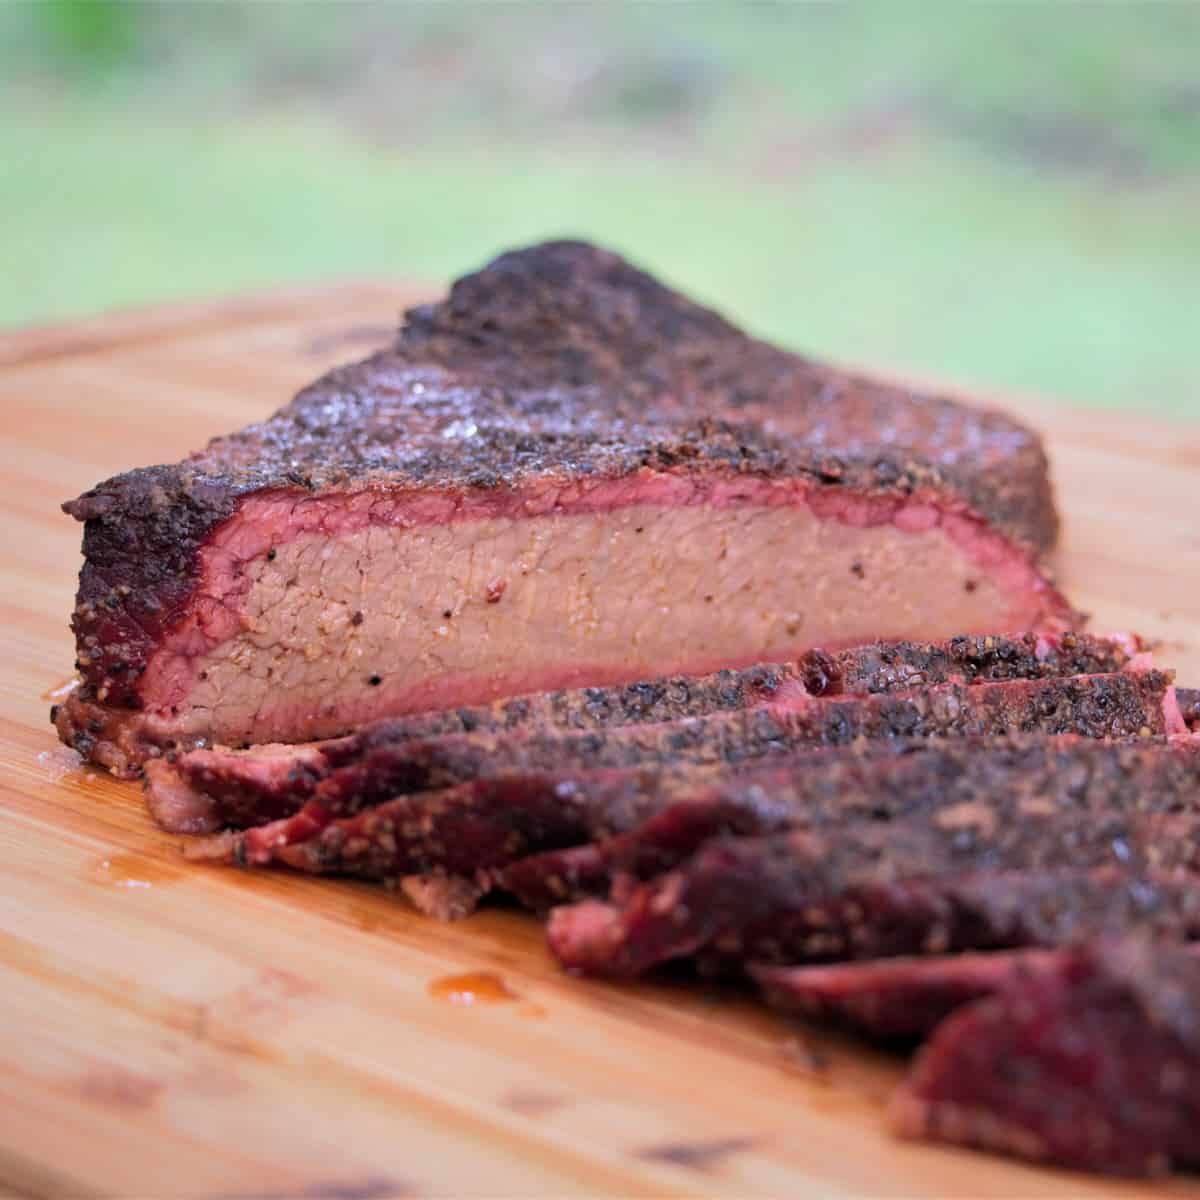 WHAT IS A BRISKET FLAT?